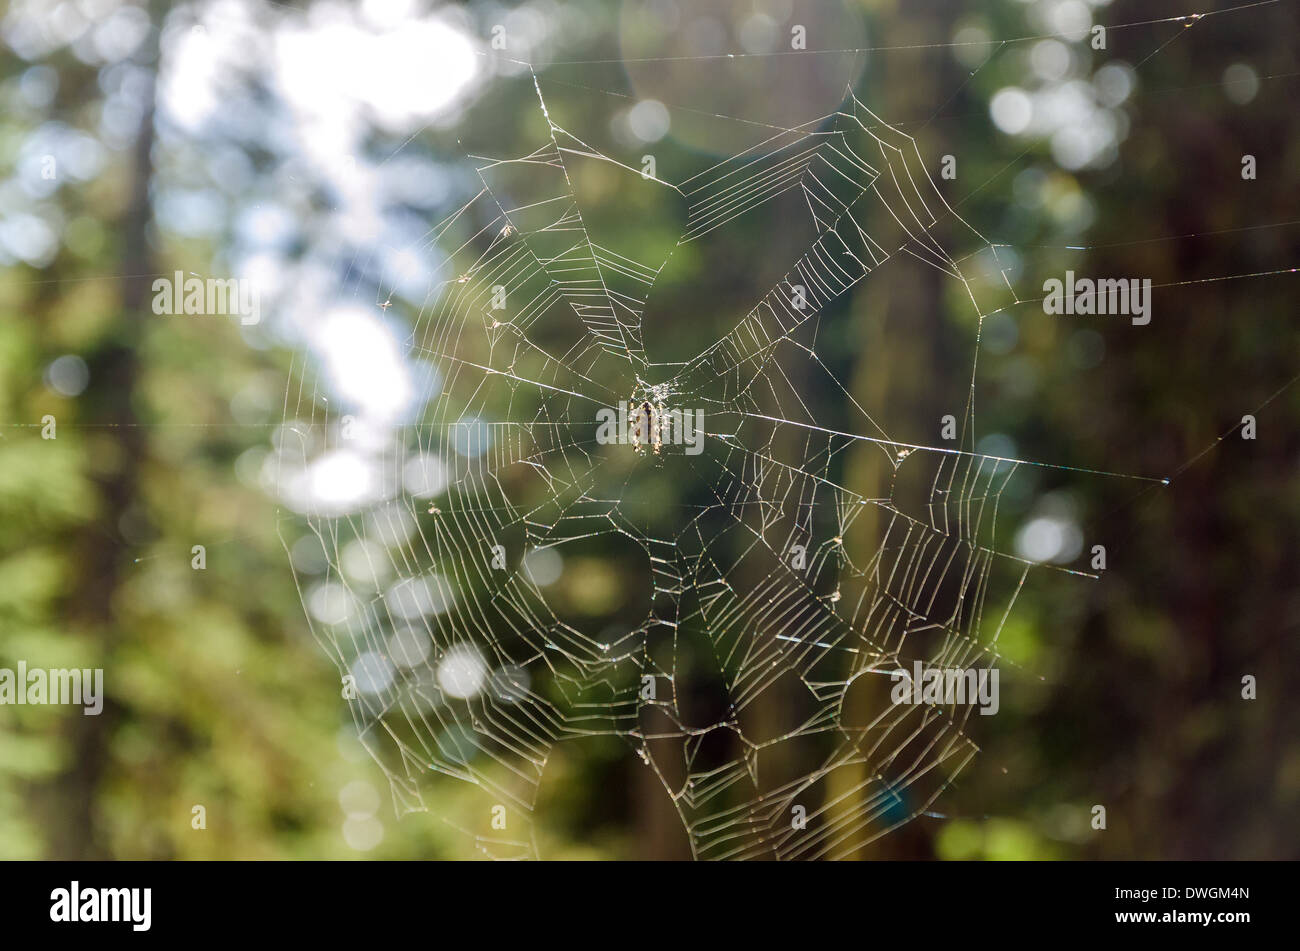 Spider on a spiderweb in a forest Stock Photo